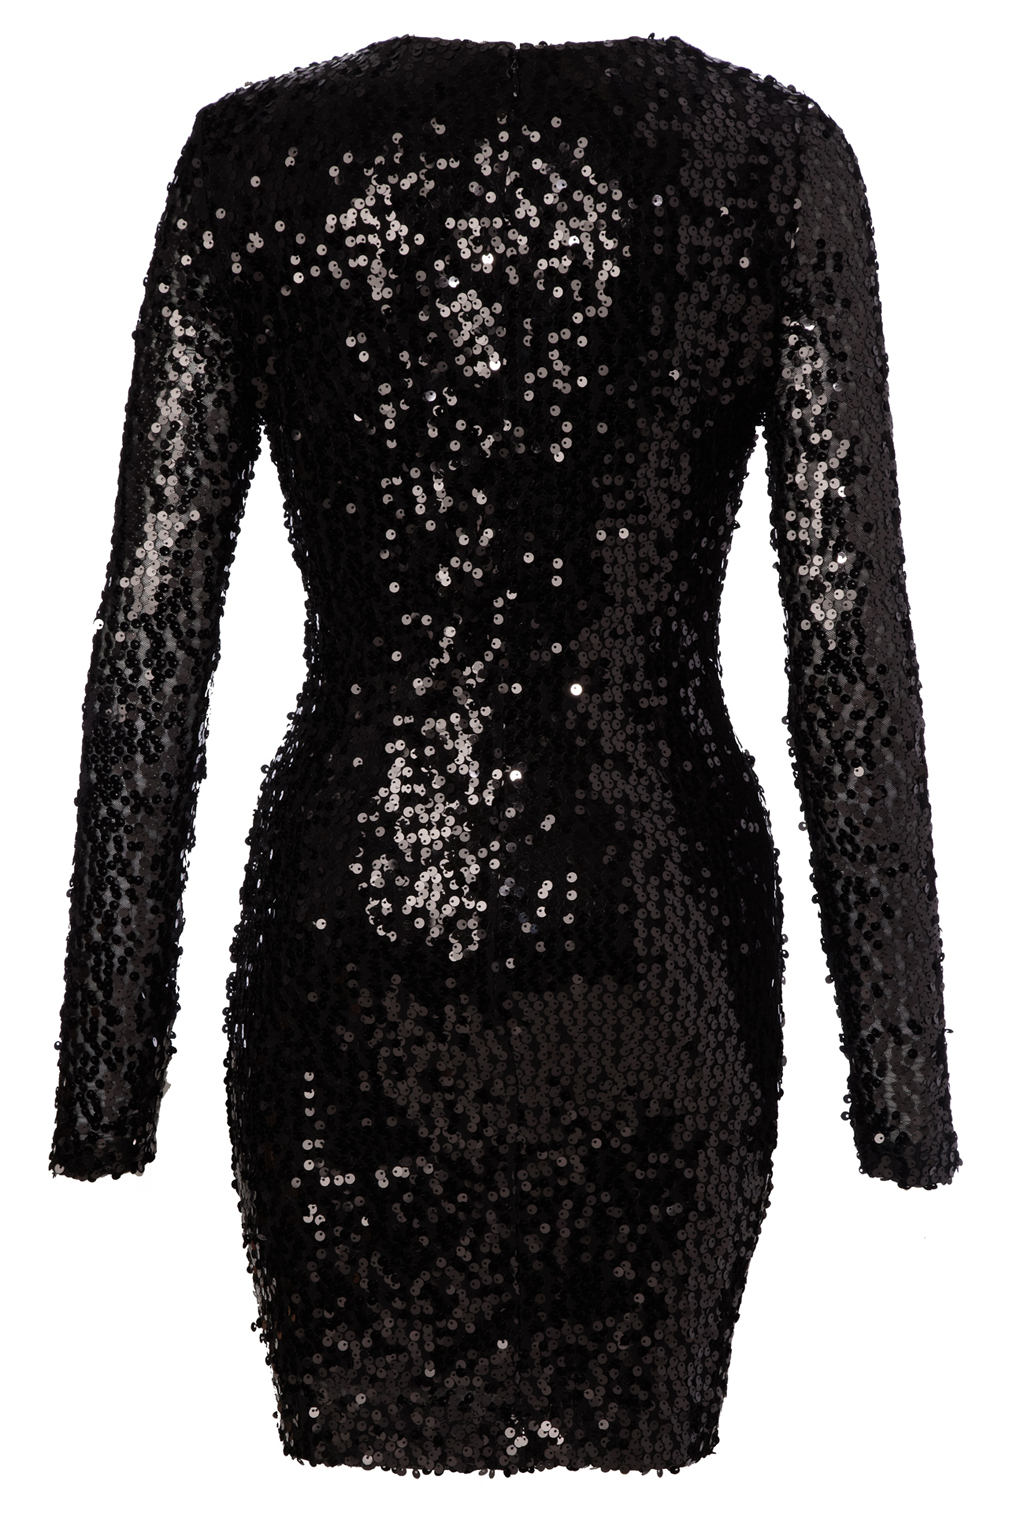 Lyst - French connection Lust Sequin Fitted Dress in Black